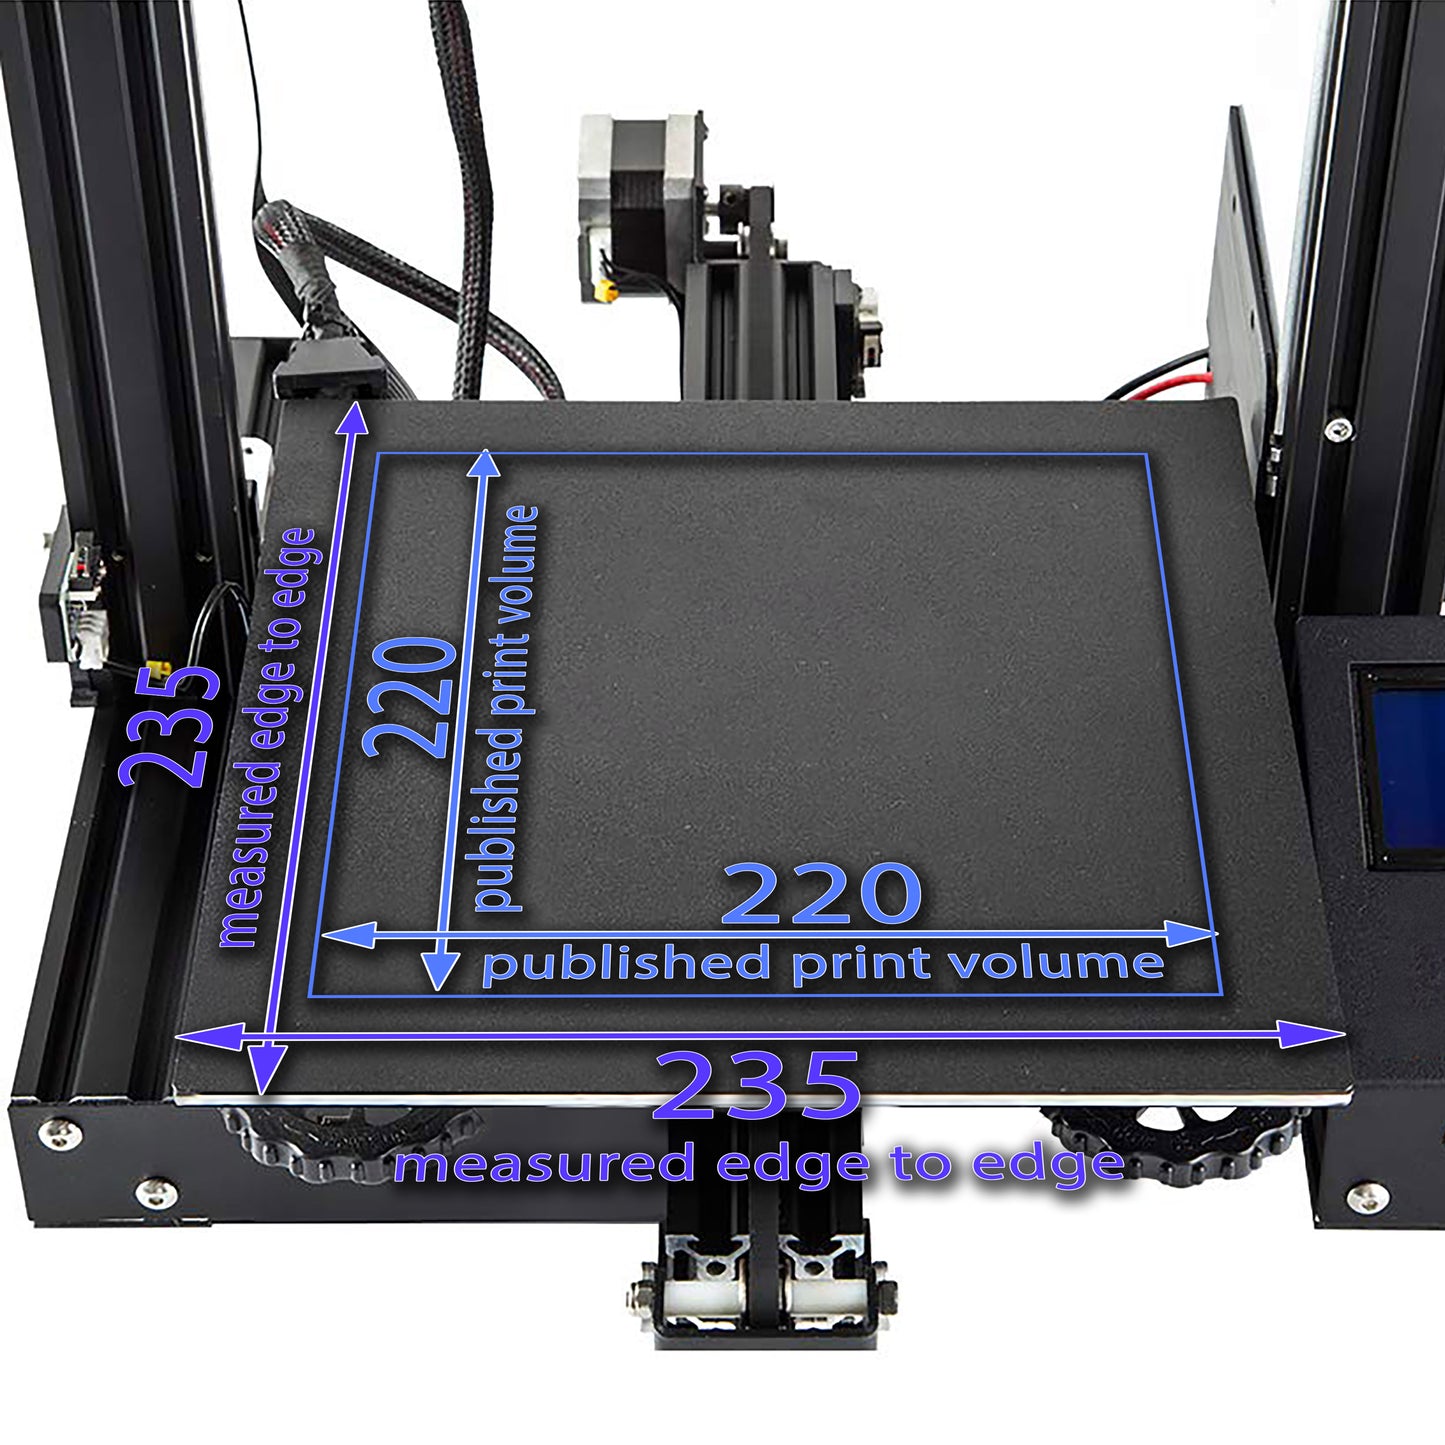 410 x 410 Kit with Pre-Installed PEX Build Surface - Creality CR-10 S4, VORON Design Core XY